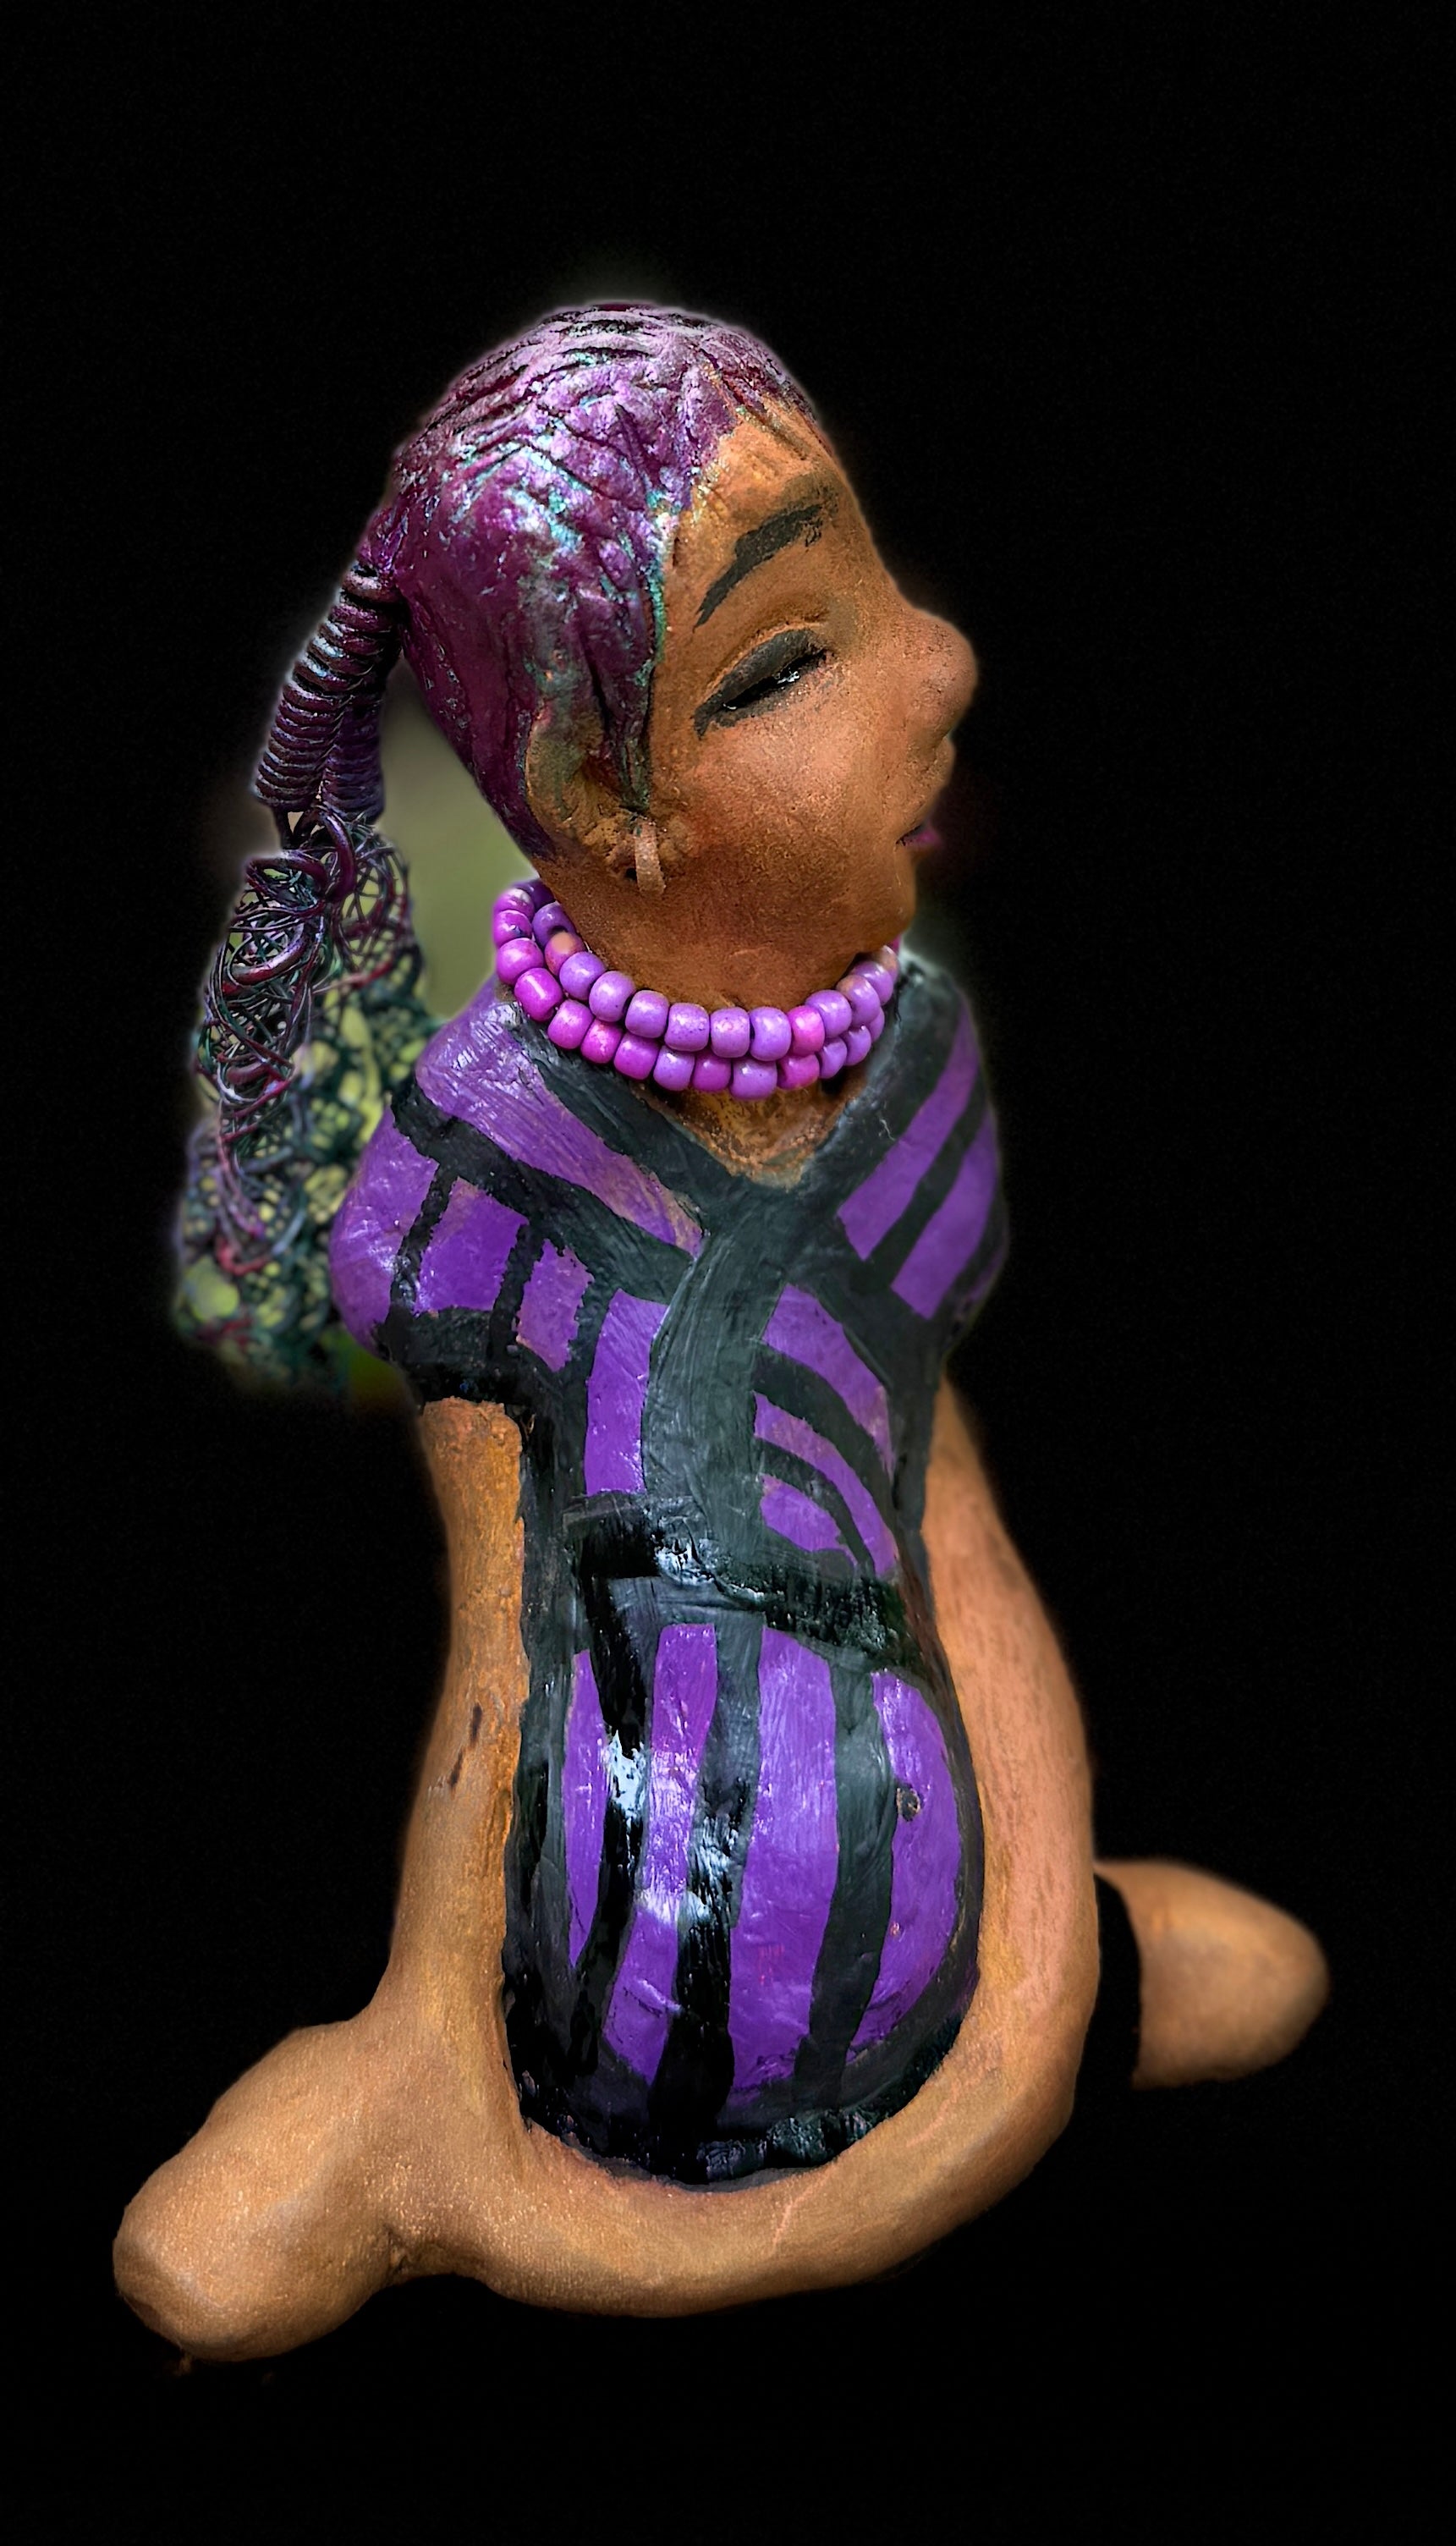 Zola is 7" x 5" x 3" raku fired scupture and weighs 12 ozs.<br>She wears a lustrous striped purple dress.<br>Her coiled wire hair is her crown of glory.<br><br>Zola sits in a yoga pose. Her expression is &nbsp;of curiosity. She will make an ideal beginning piece from the Herdew Collection!<br>Free Shipping